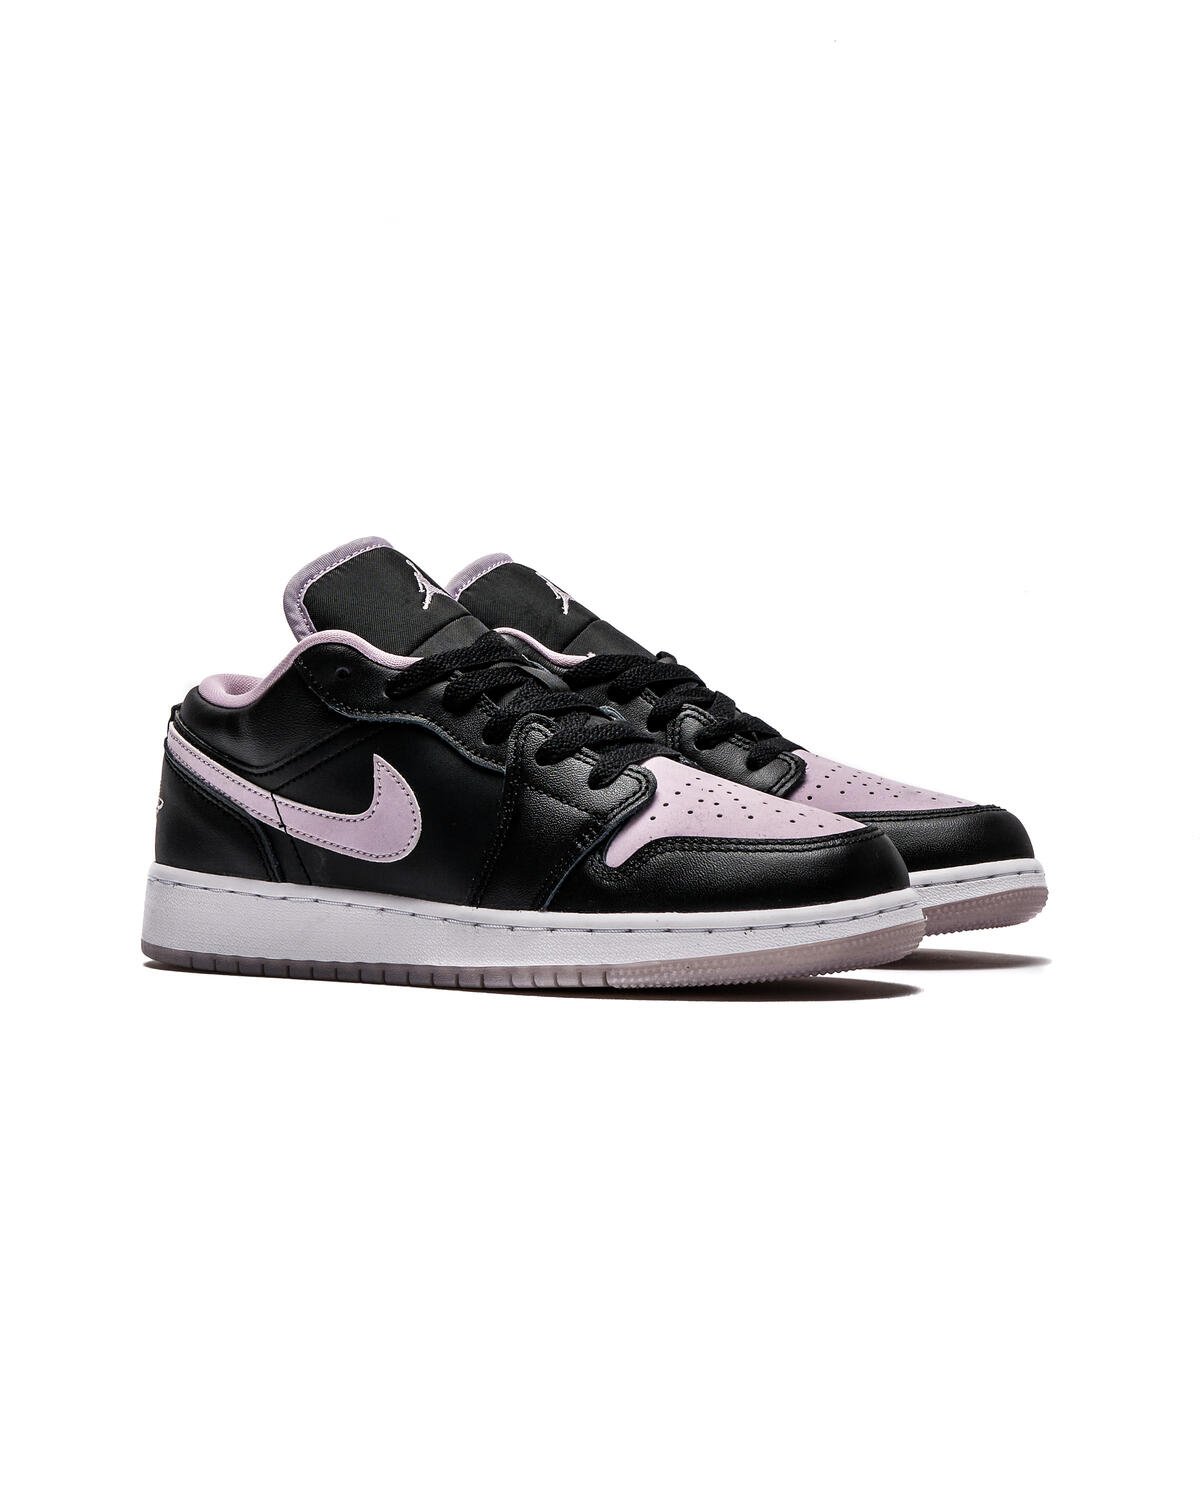 Nike Air Force 1/1 GS 'Black Hyper Pink' | Kid's Size 6